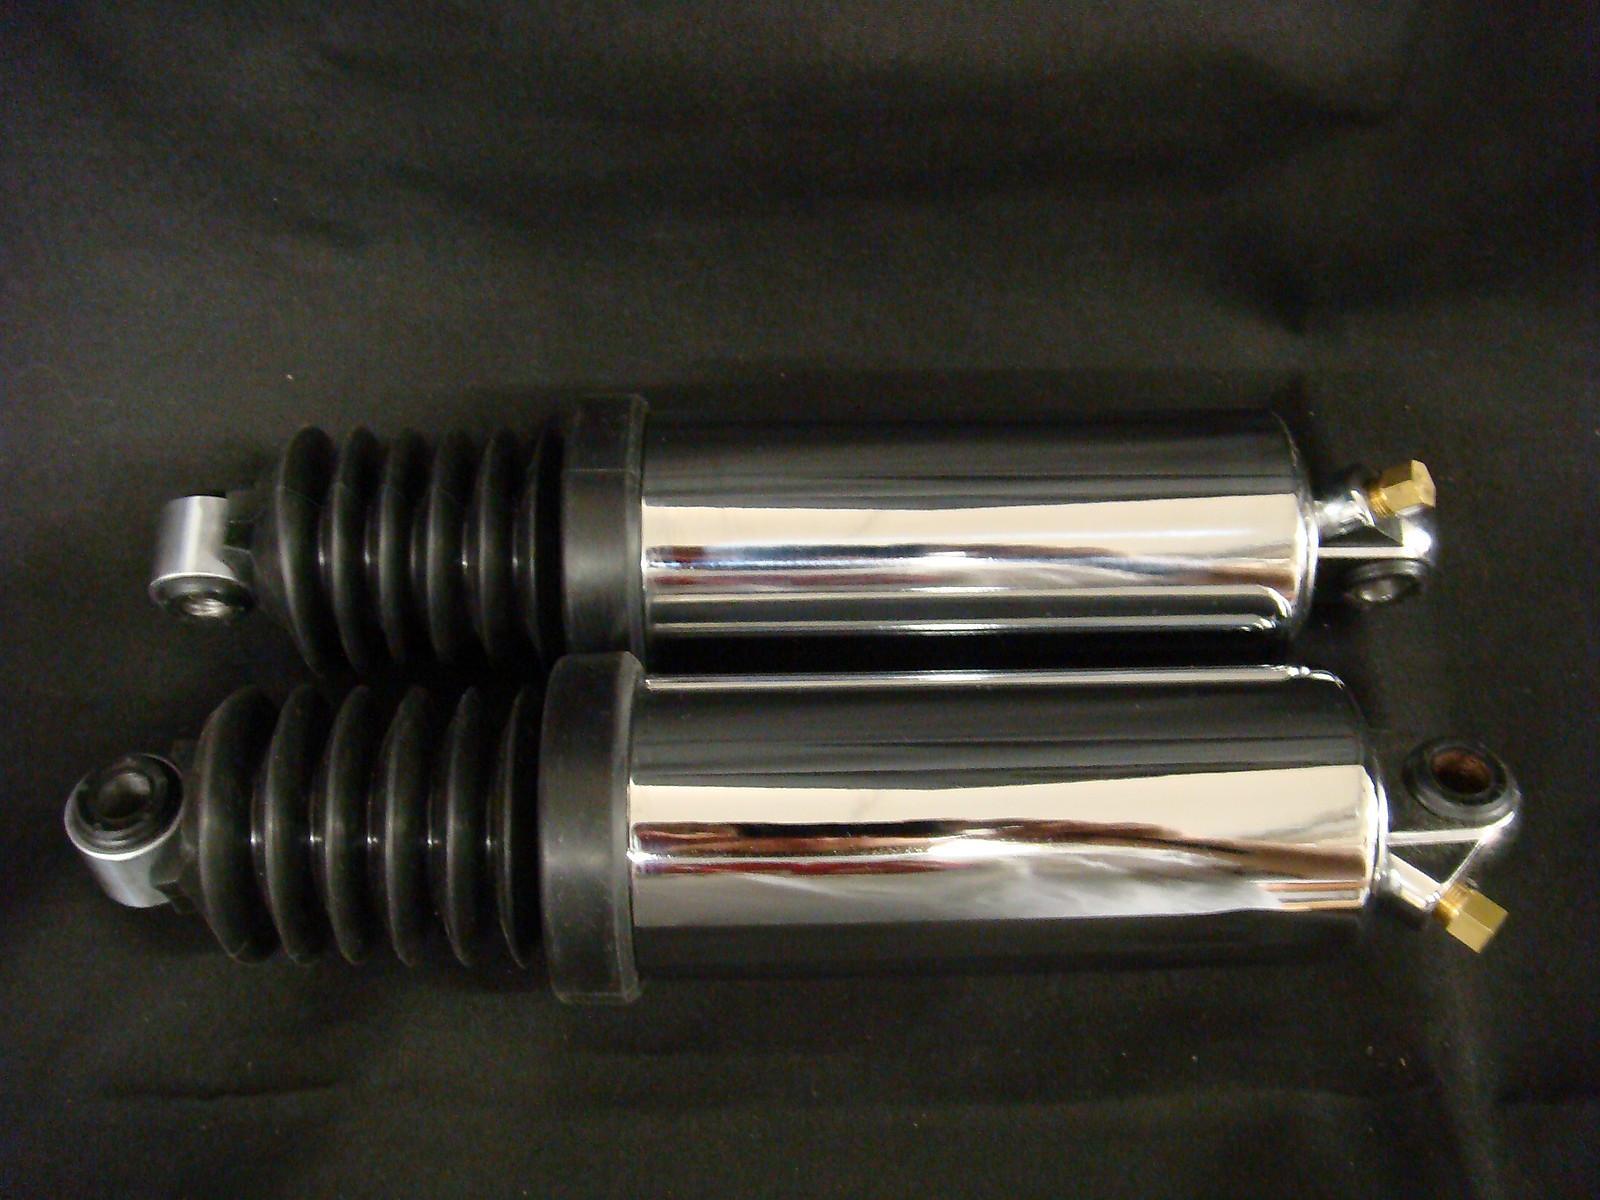 Chrome plated heavy duty low air shocks for fl models 1997-2008